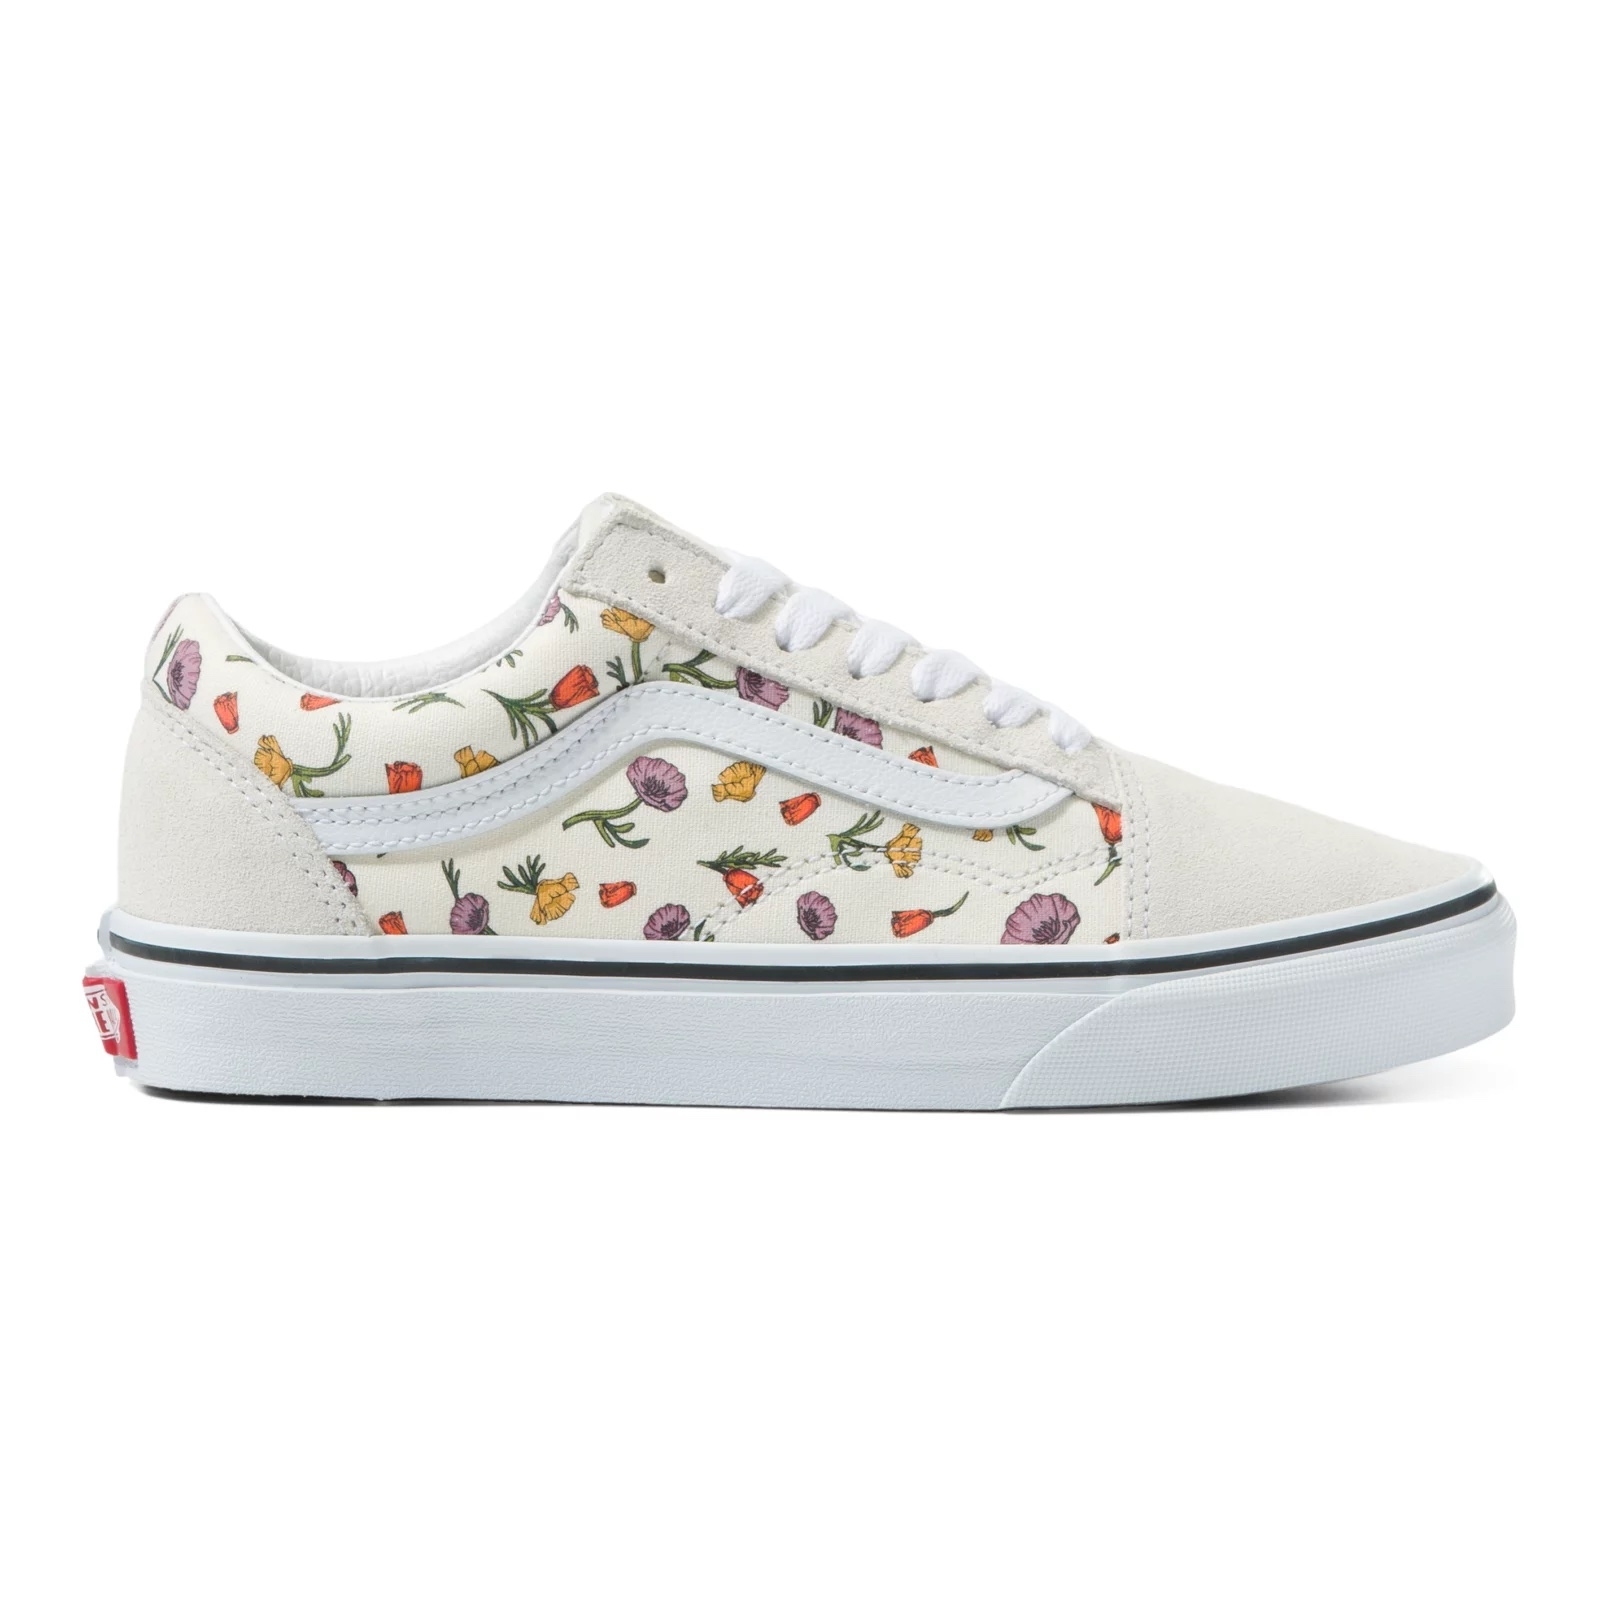 At vise Ynkelig medley Vans Old Skool (Poppy Floral Cream) Women's Shoes Casual Shoes at Switch  Skateboarding